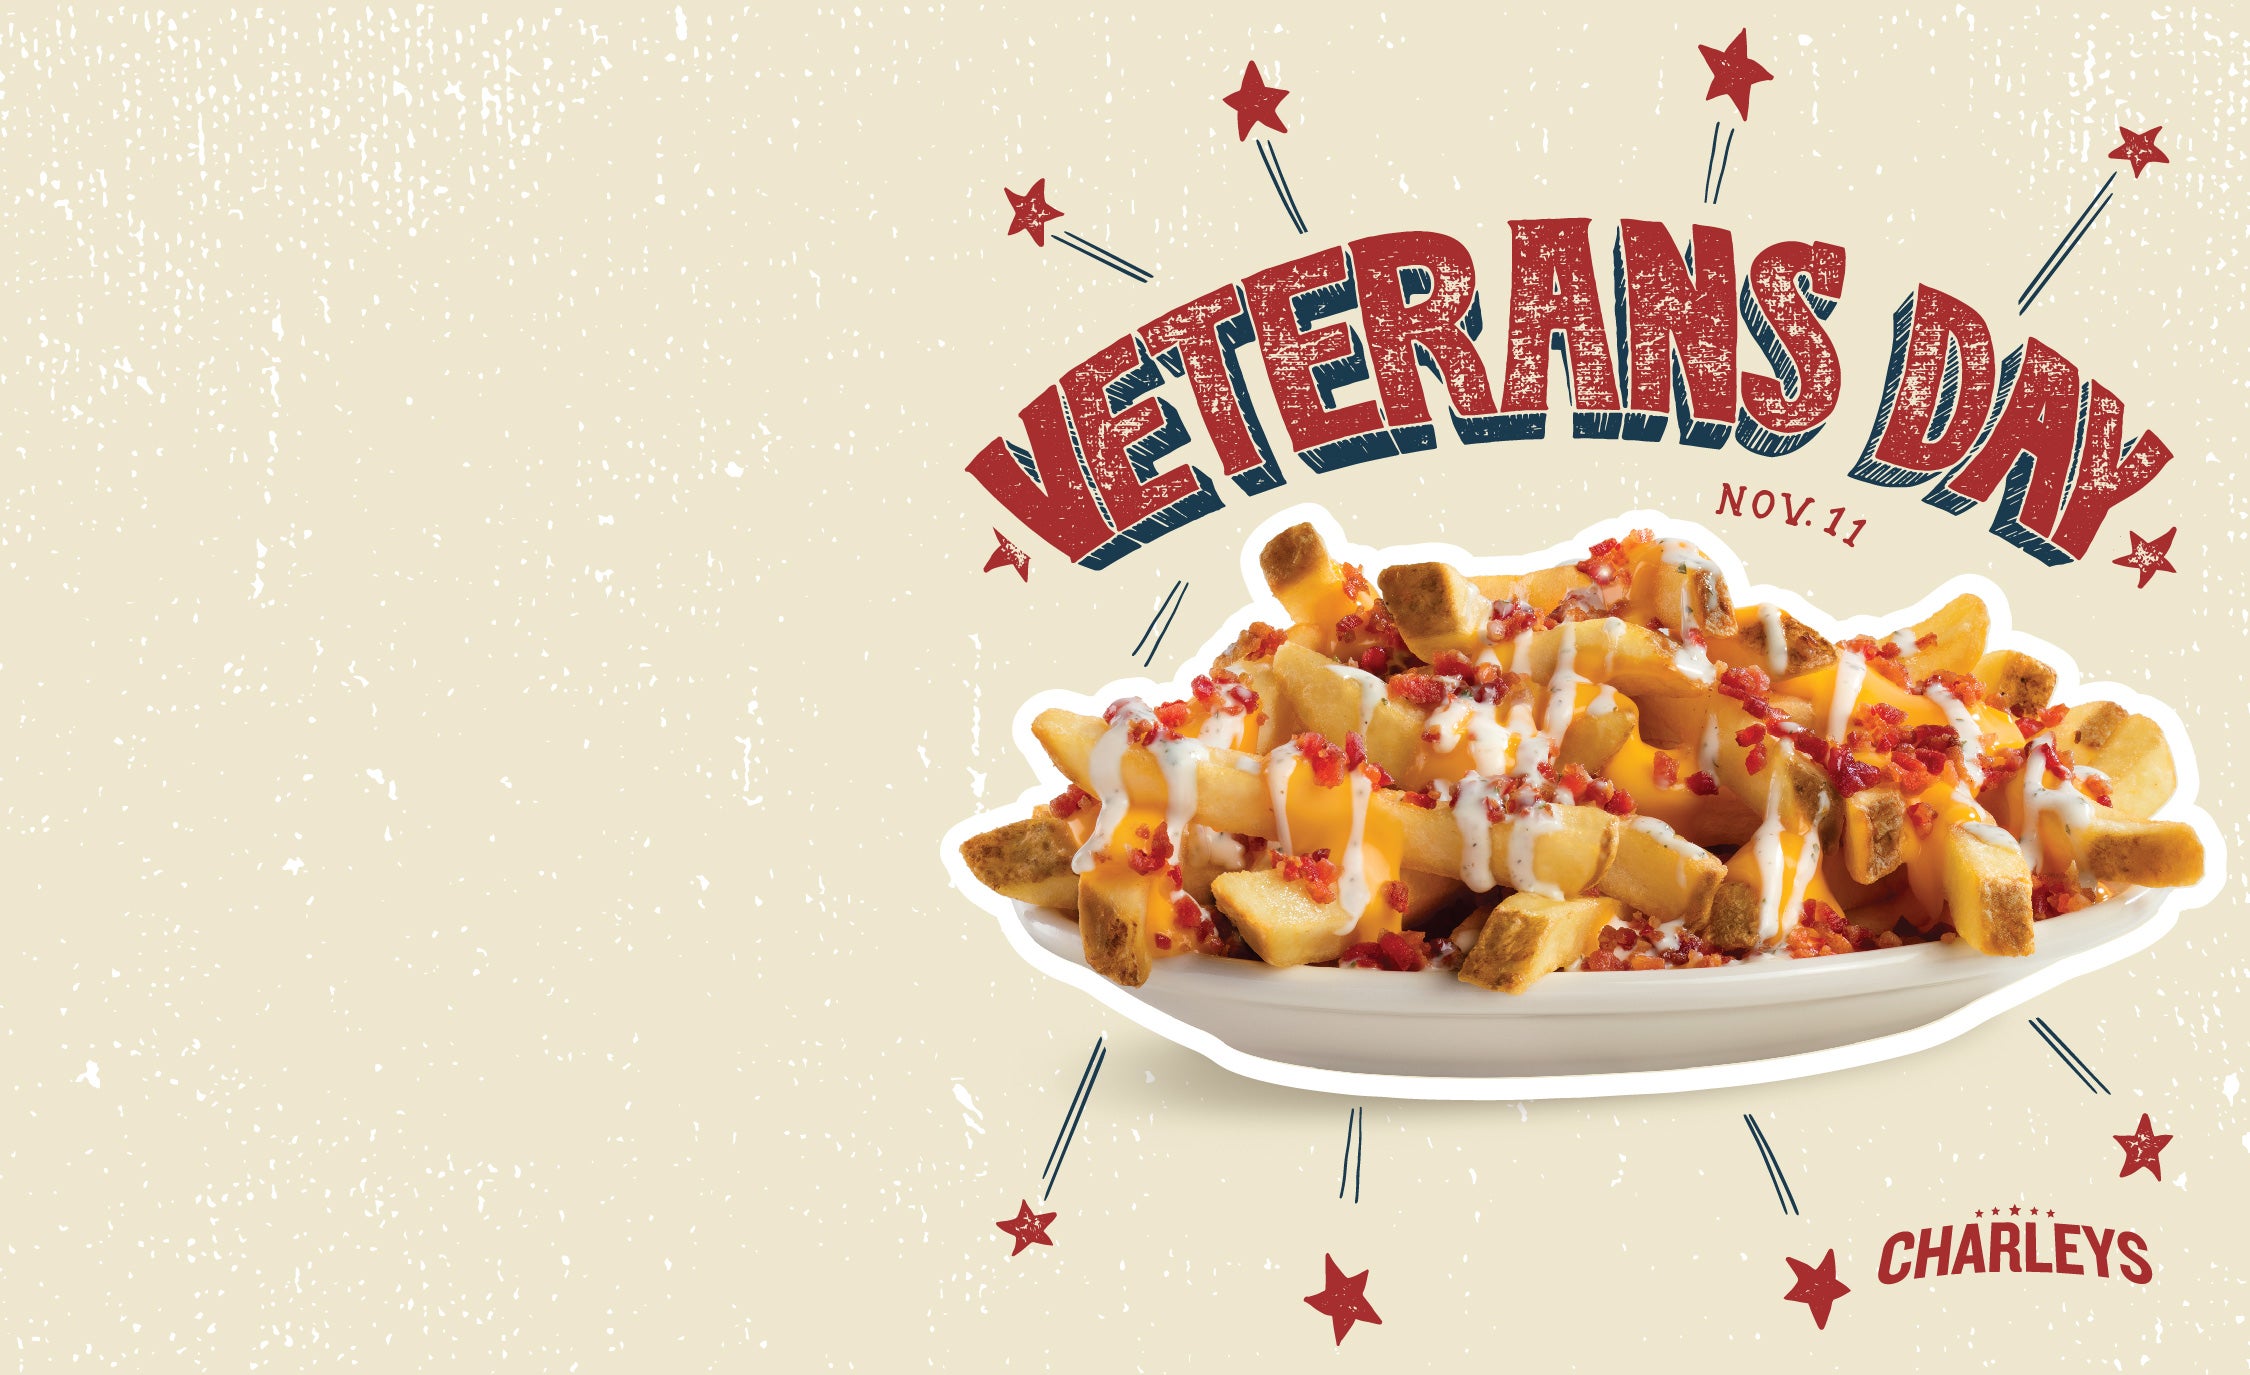 Gourmet Fries from Charleys Cheesesteaks with red text that says "Veterans Day Nov 11".